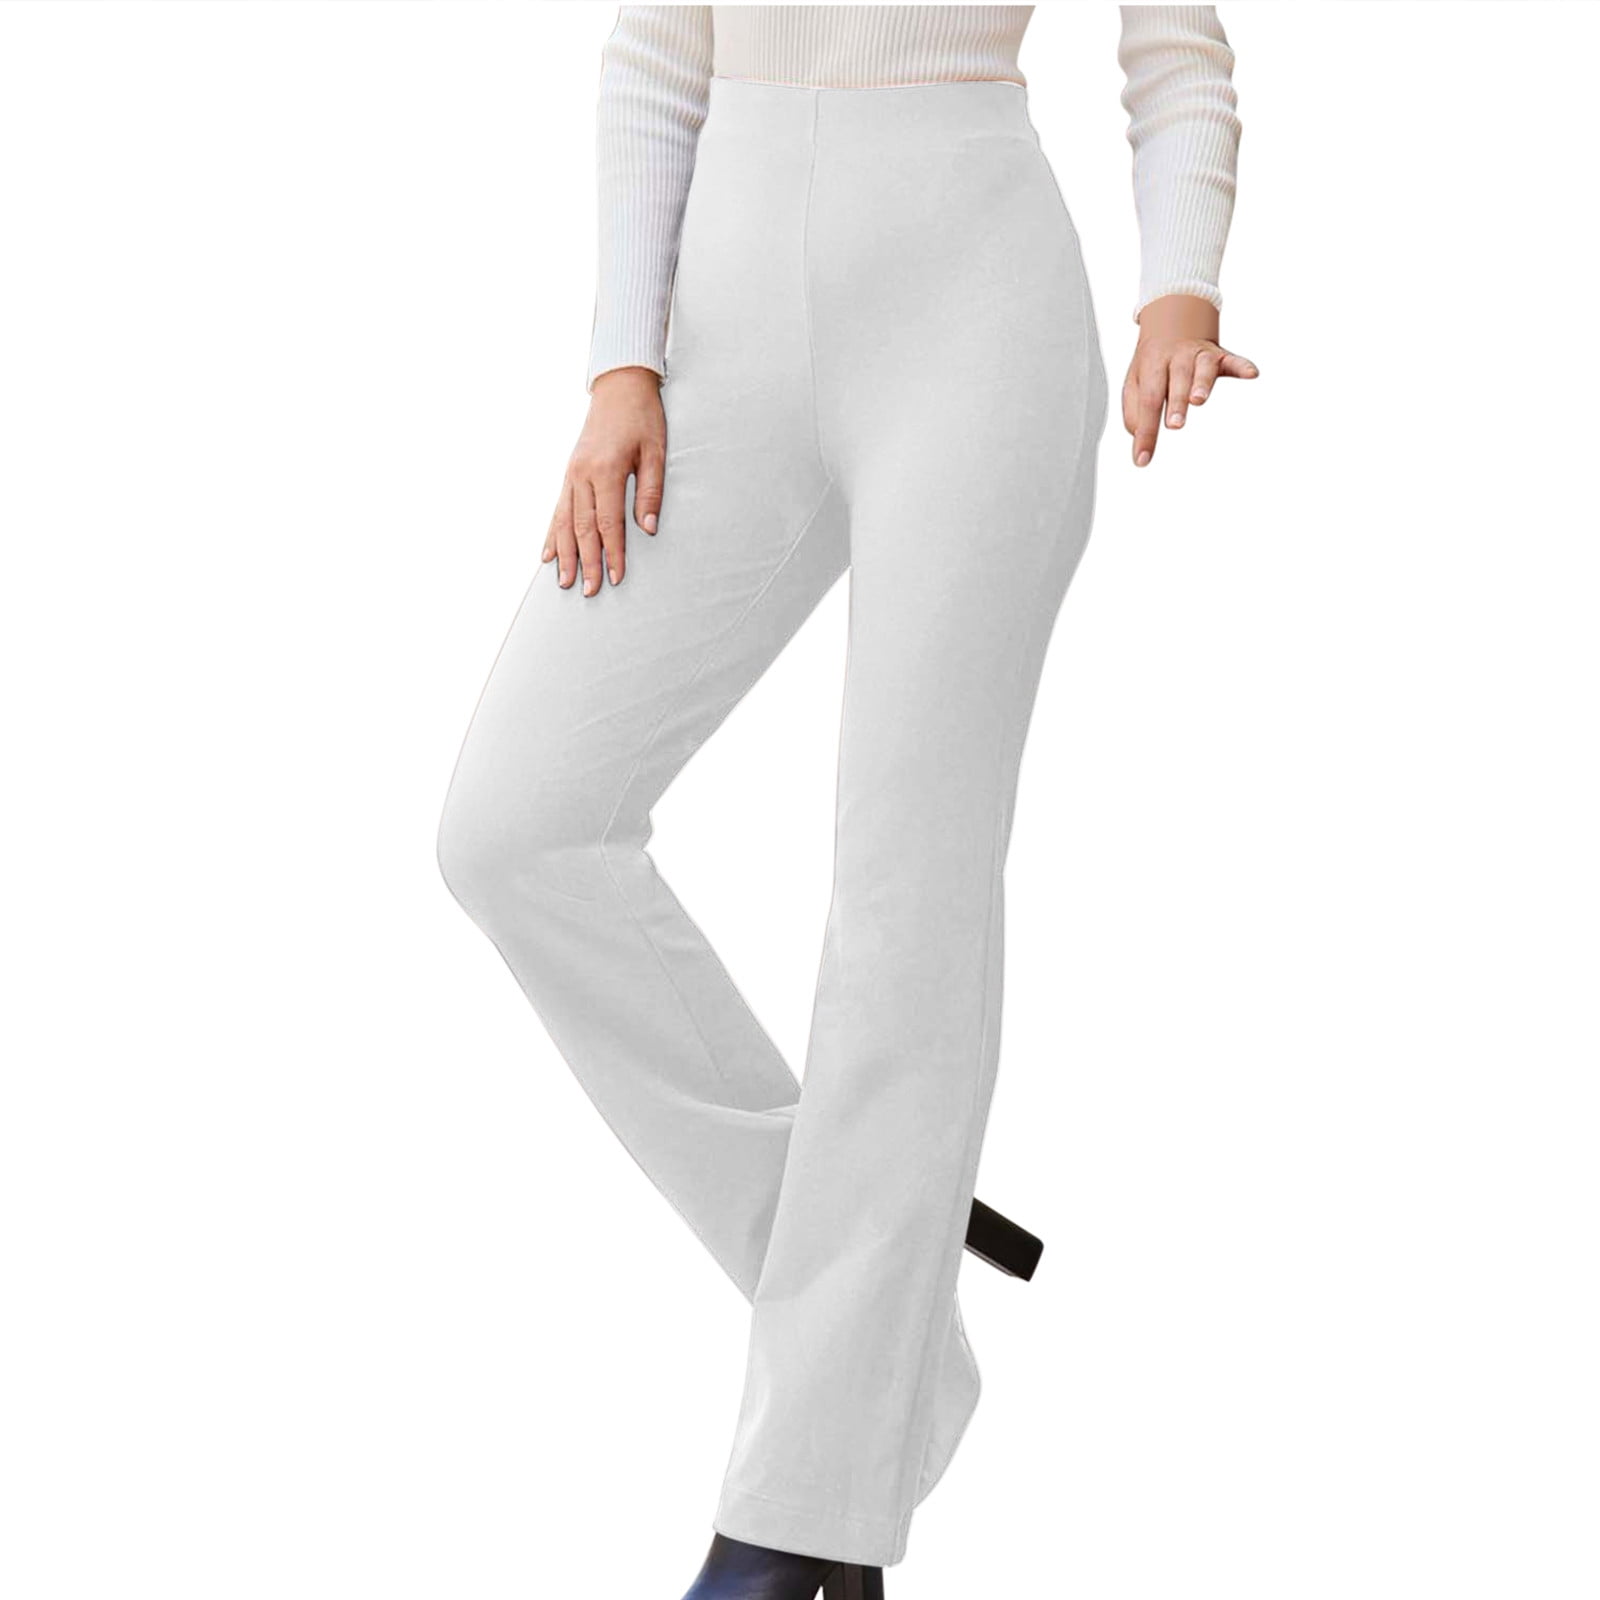 JWZUY Women Going Out Professional Office Business Pants Straight Leg  Elastic Waist Trousers Suit Pants White S 